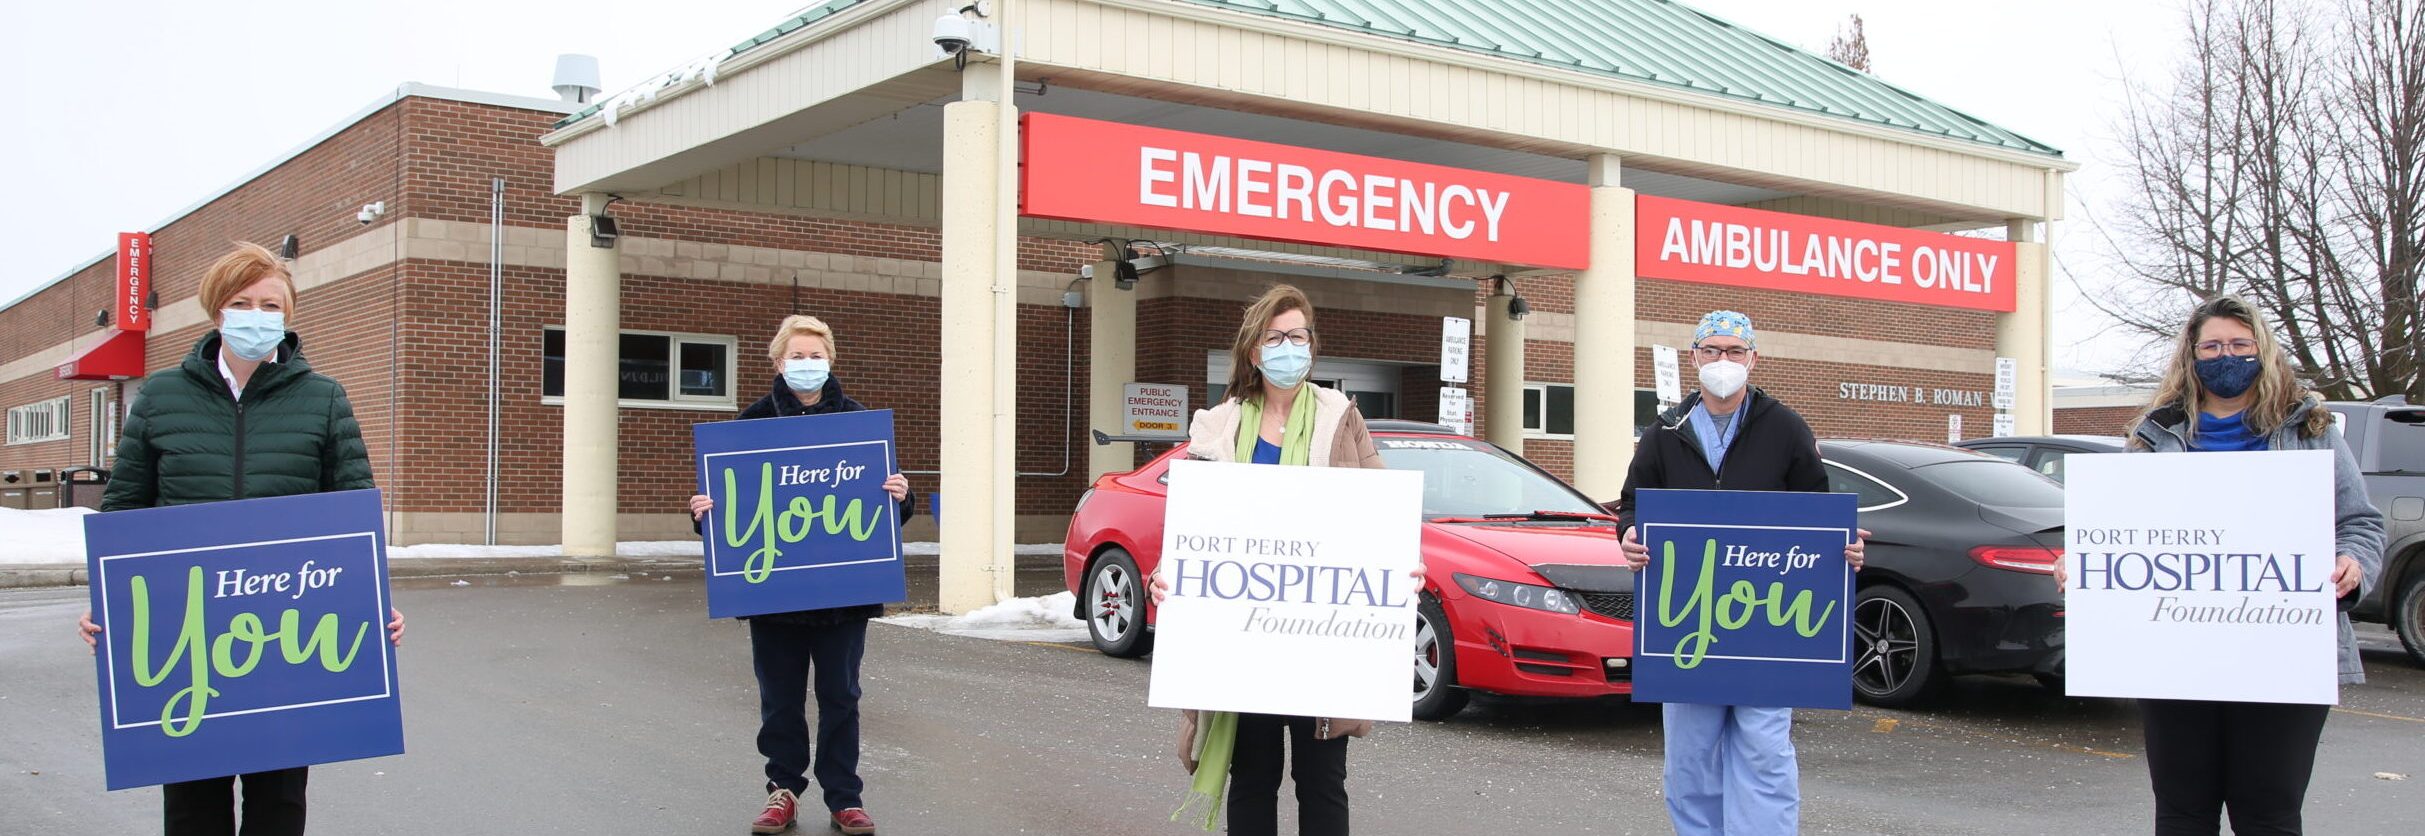 Group holding Here for your Placards, CT scanner Port Perry